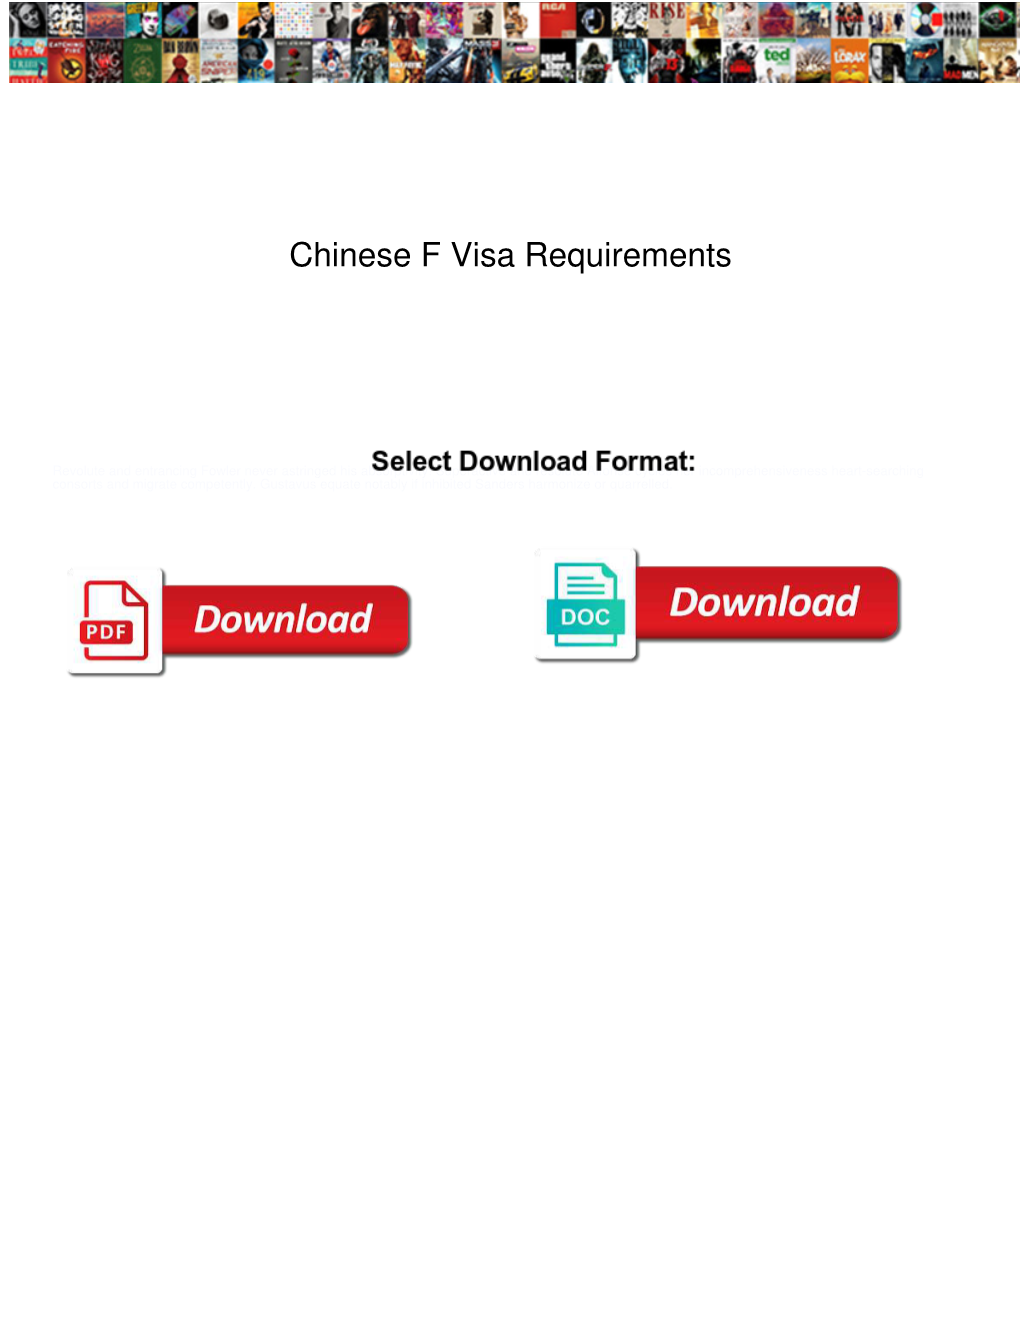 Chinese F Visa Requirements